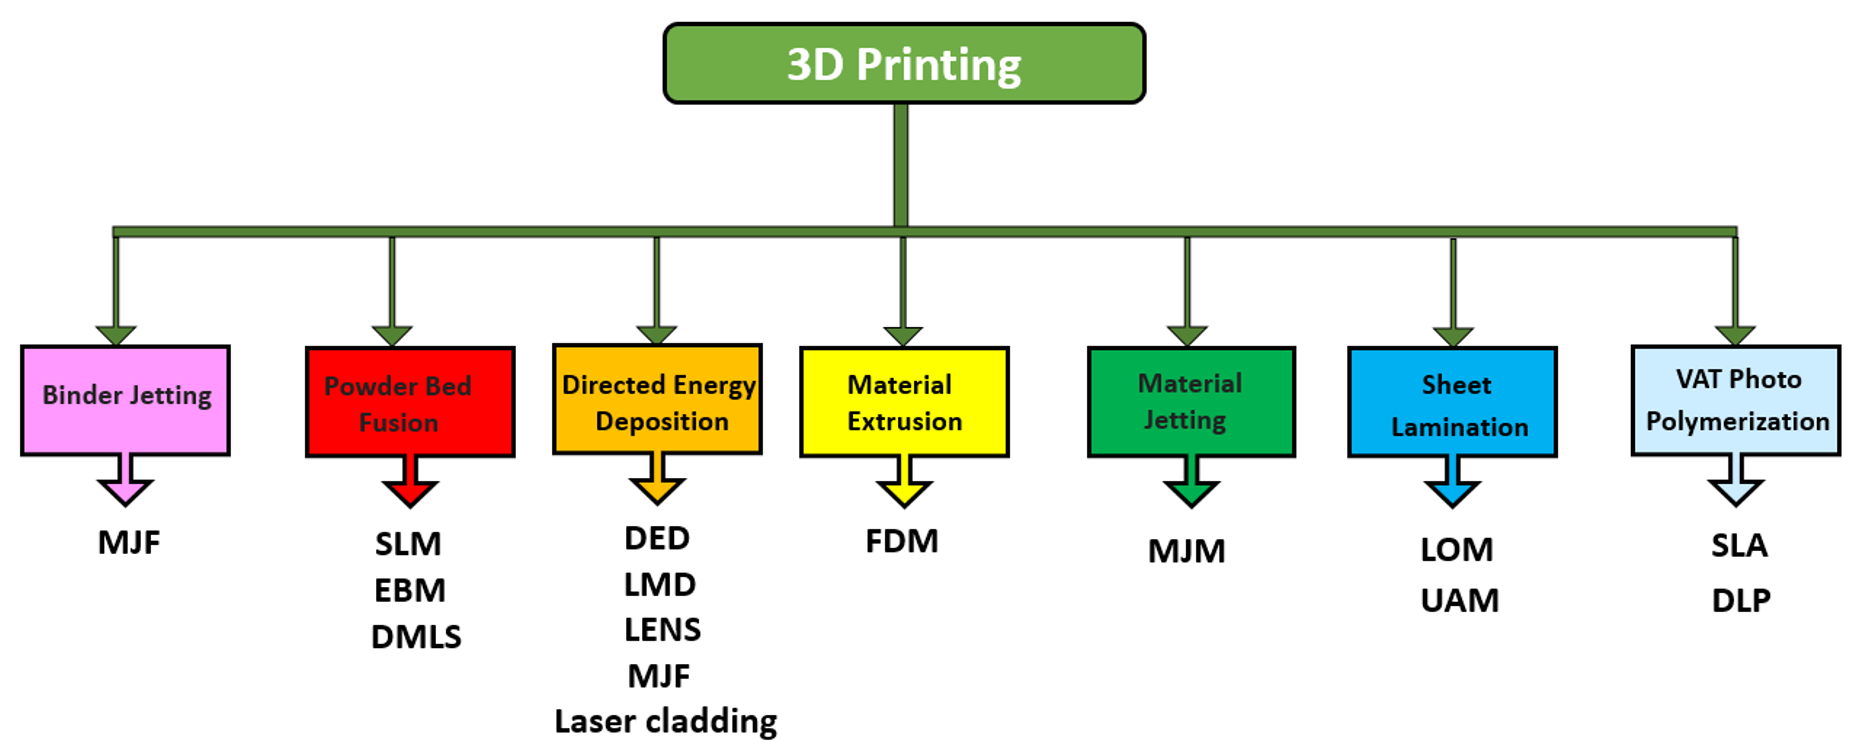 3D printing category